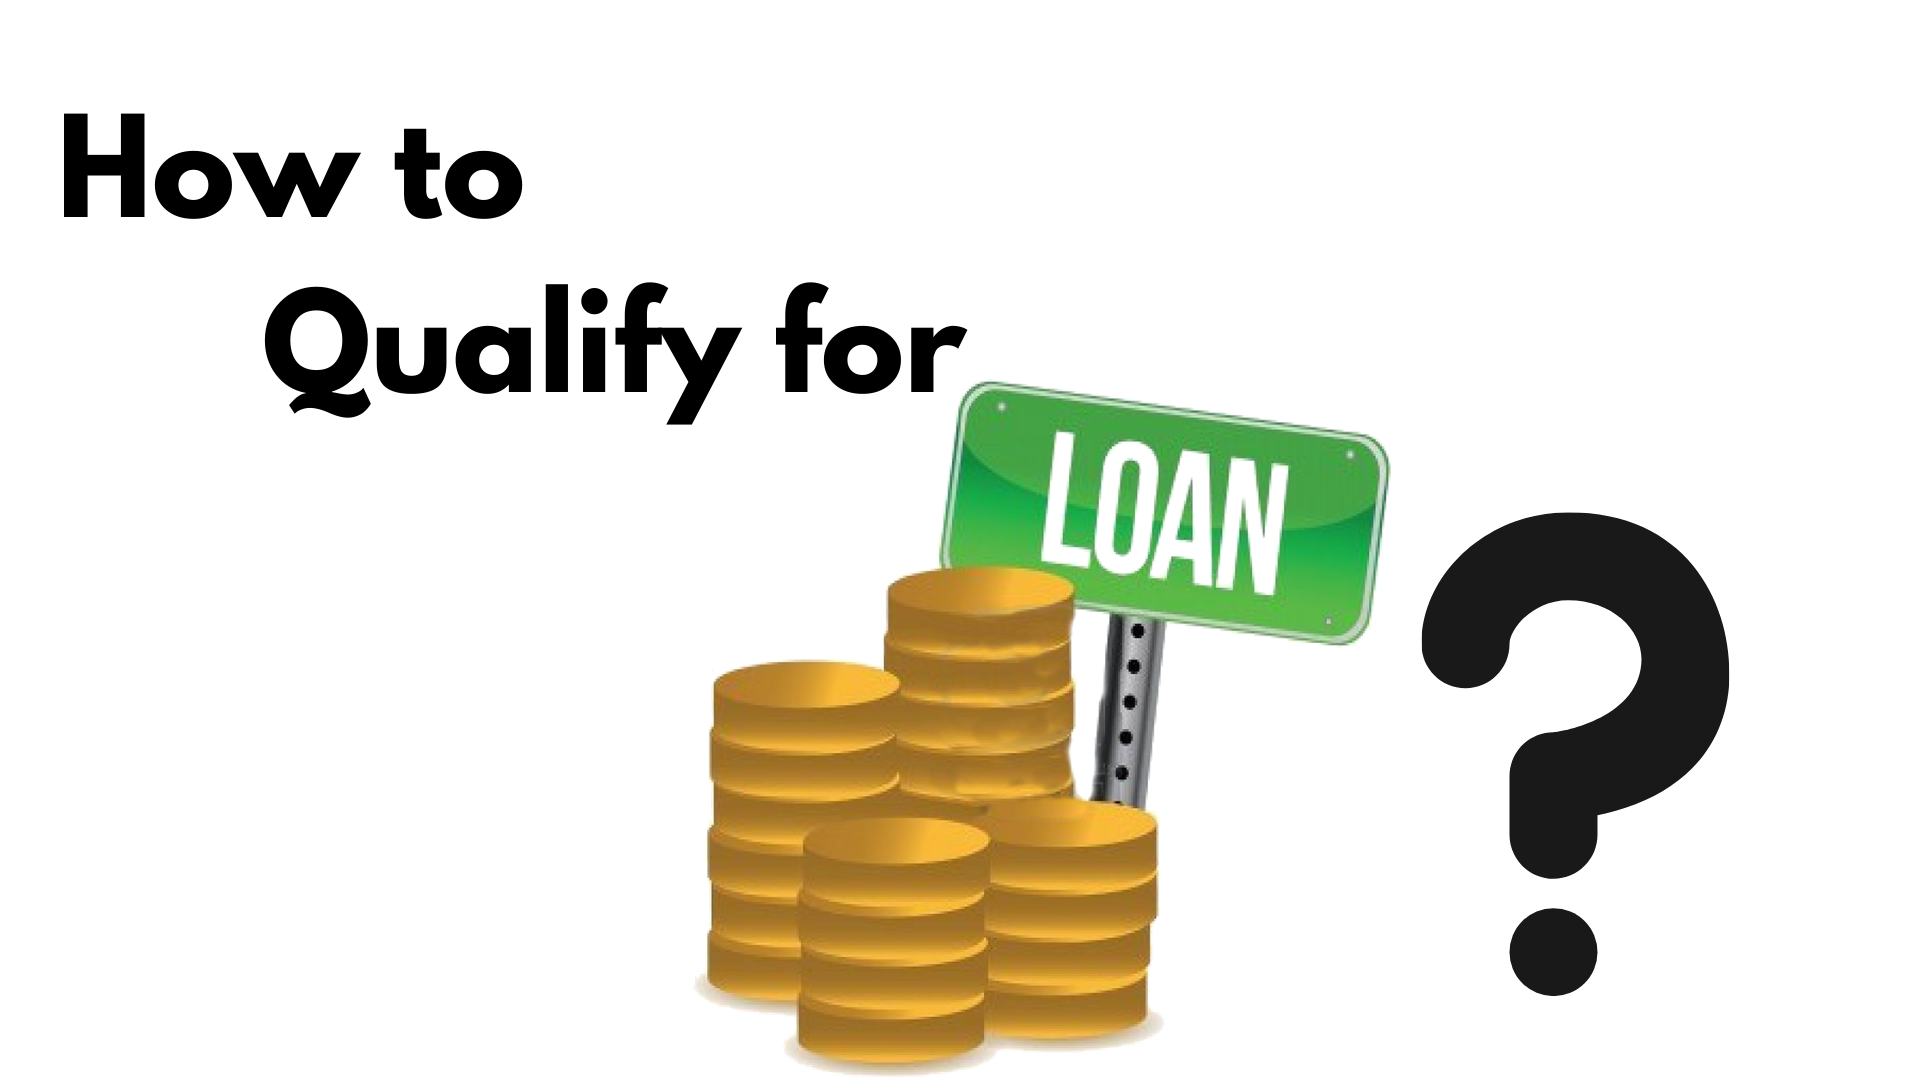 loan-how-do-i-qualify-for-a-personal-business-or-car-title-loan-bhm